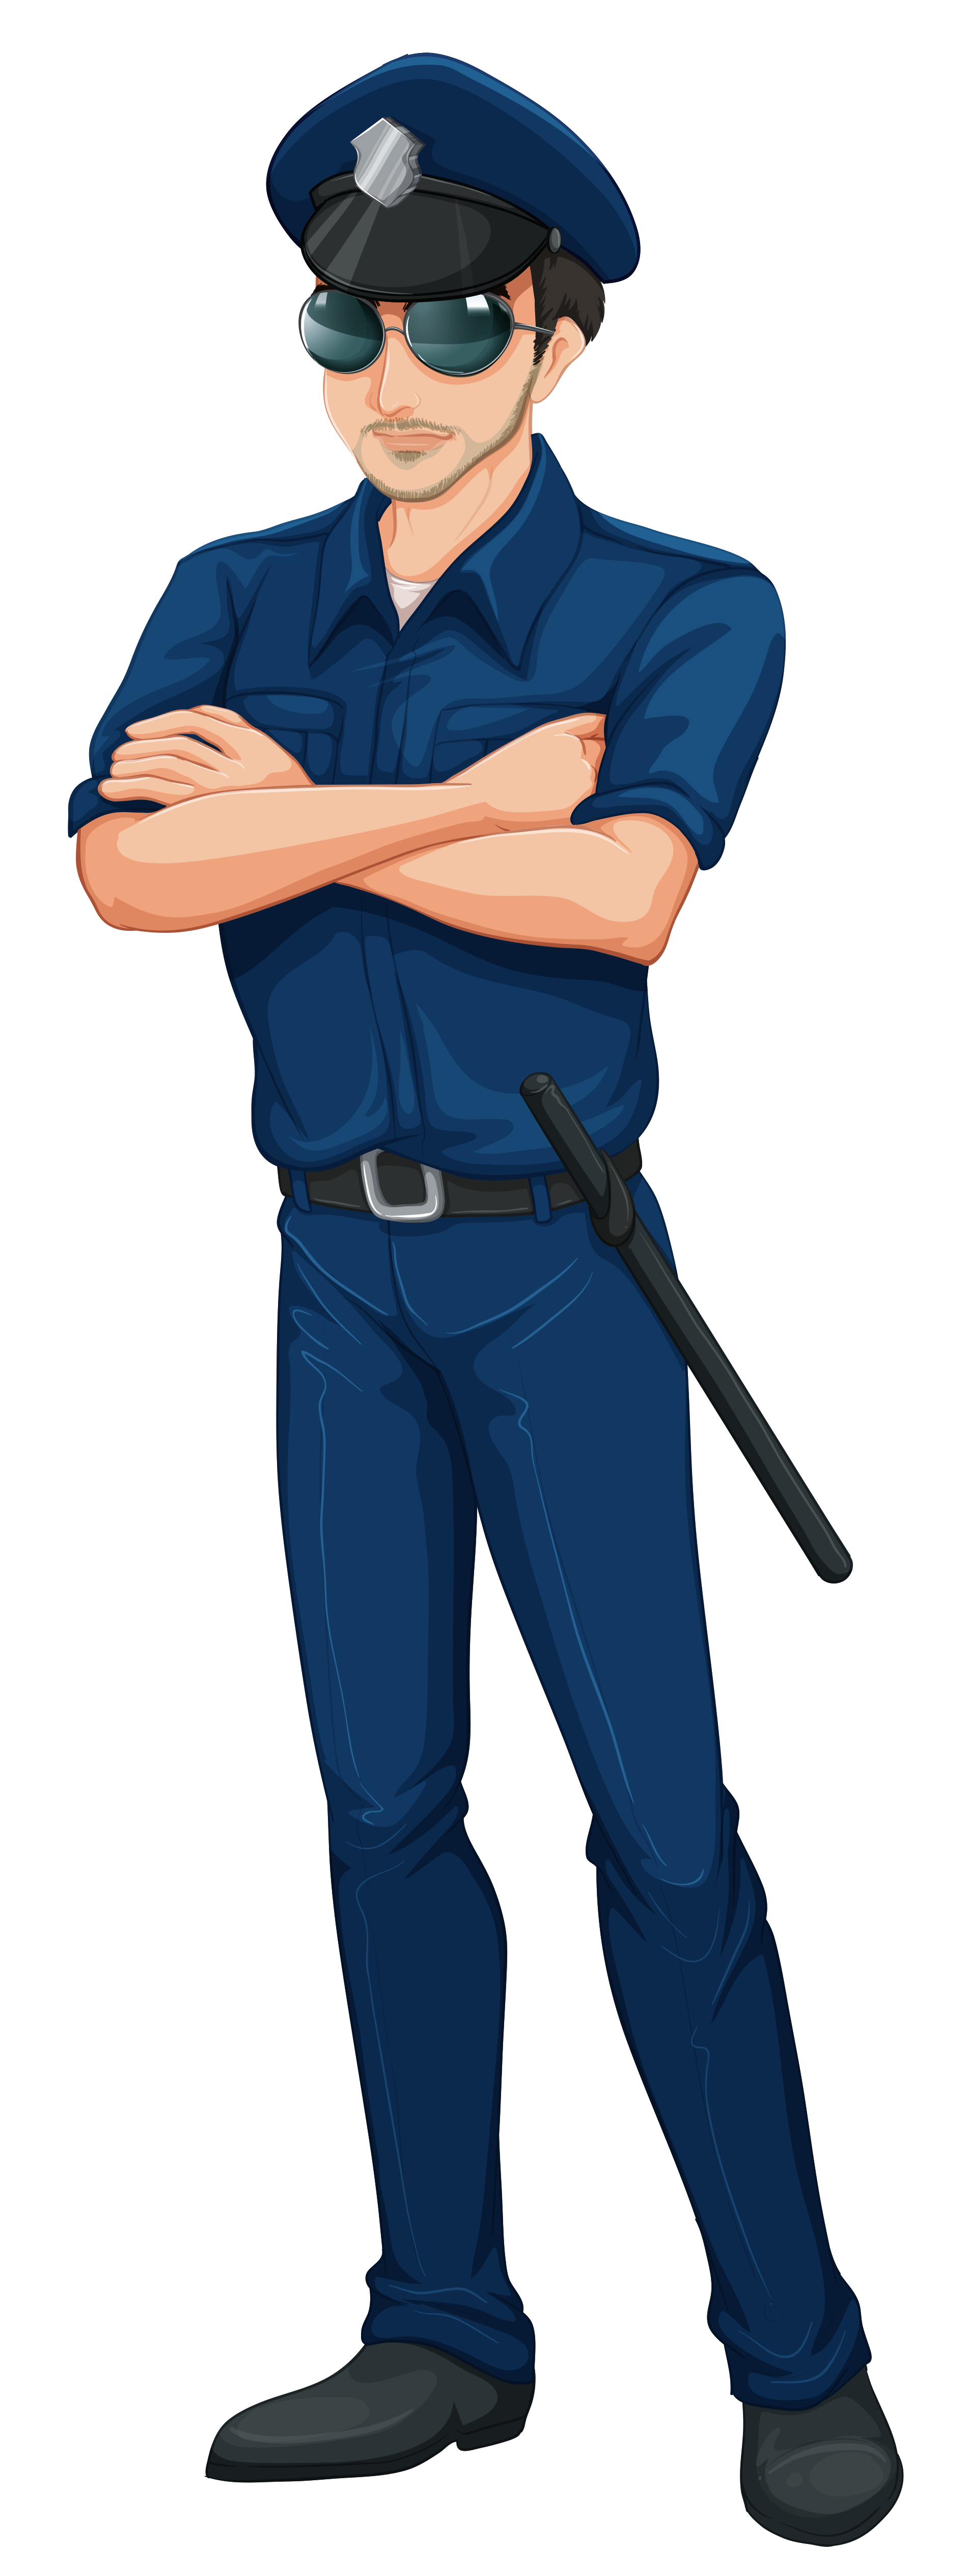 Cop Policeman PNG Clip Art Image | Gallery Yopriceville ...